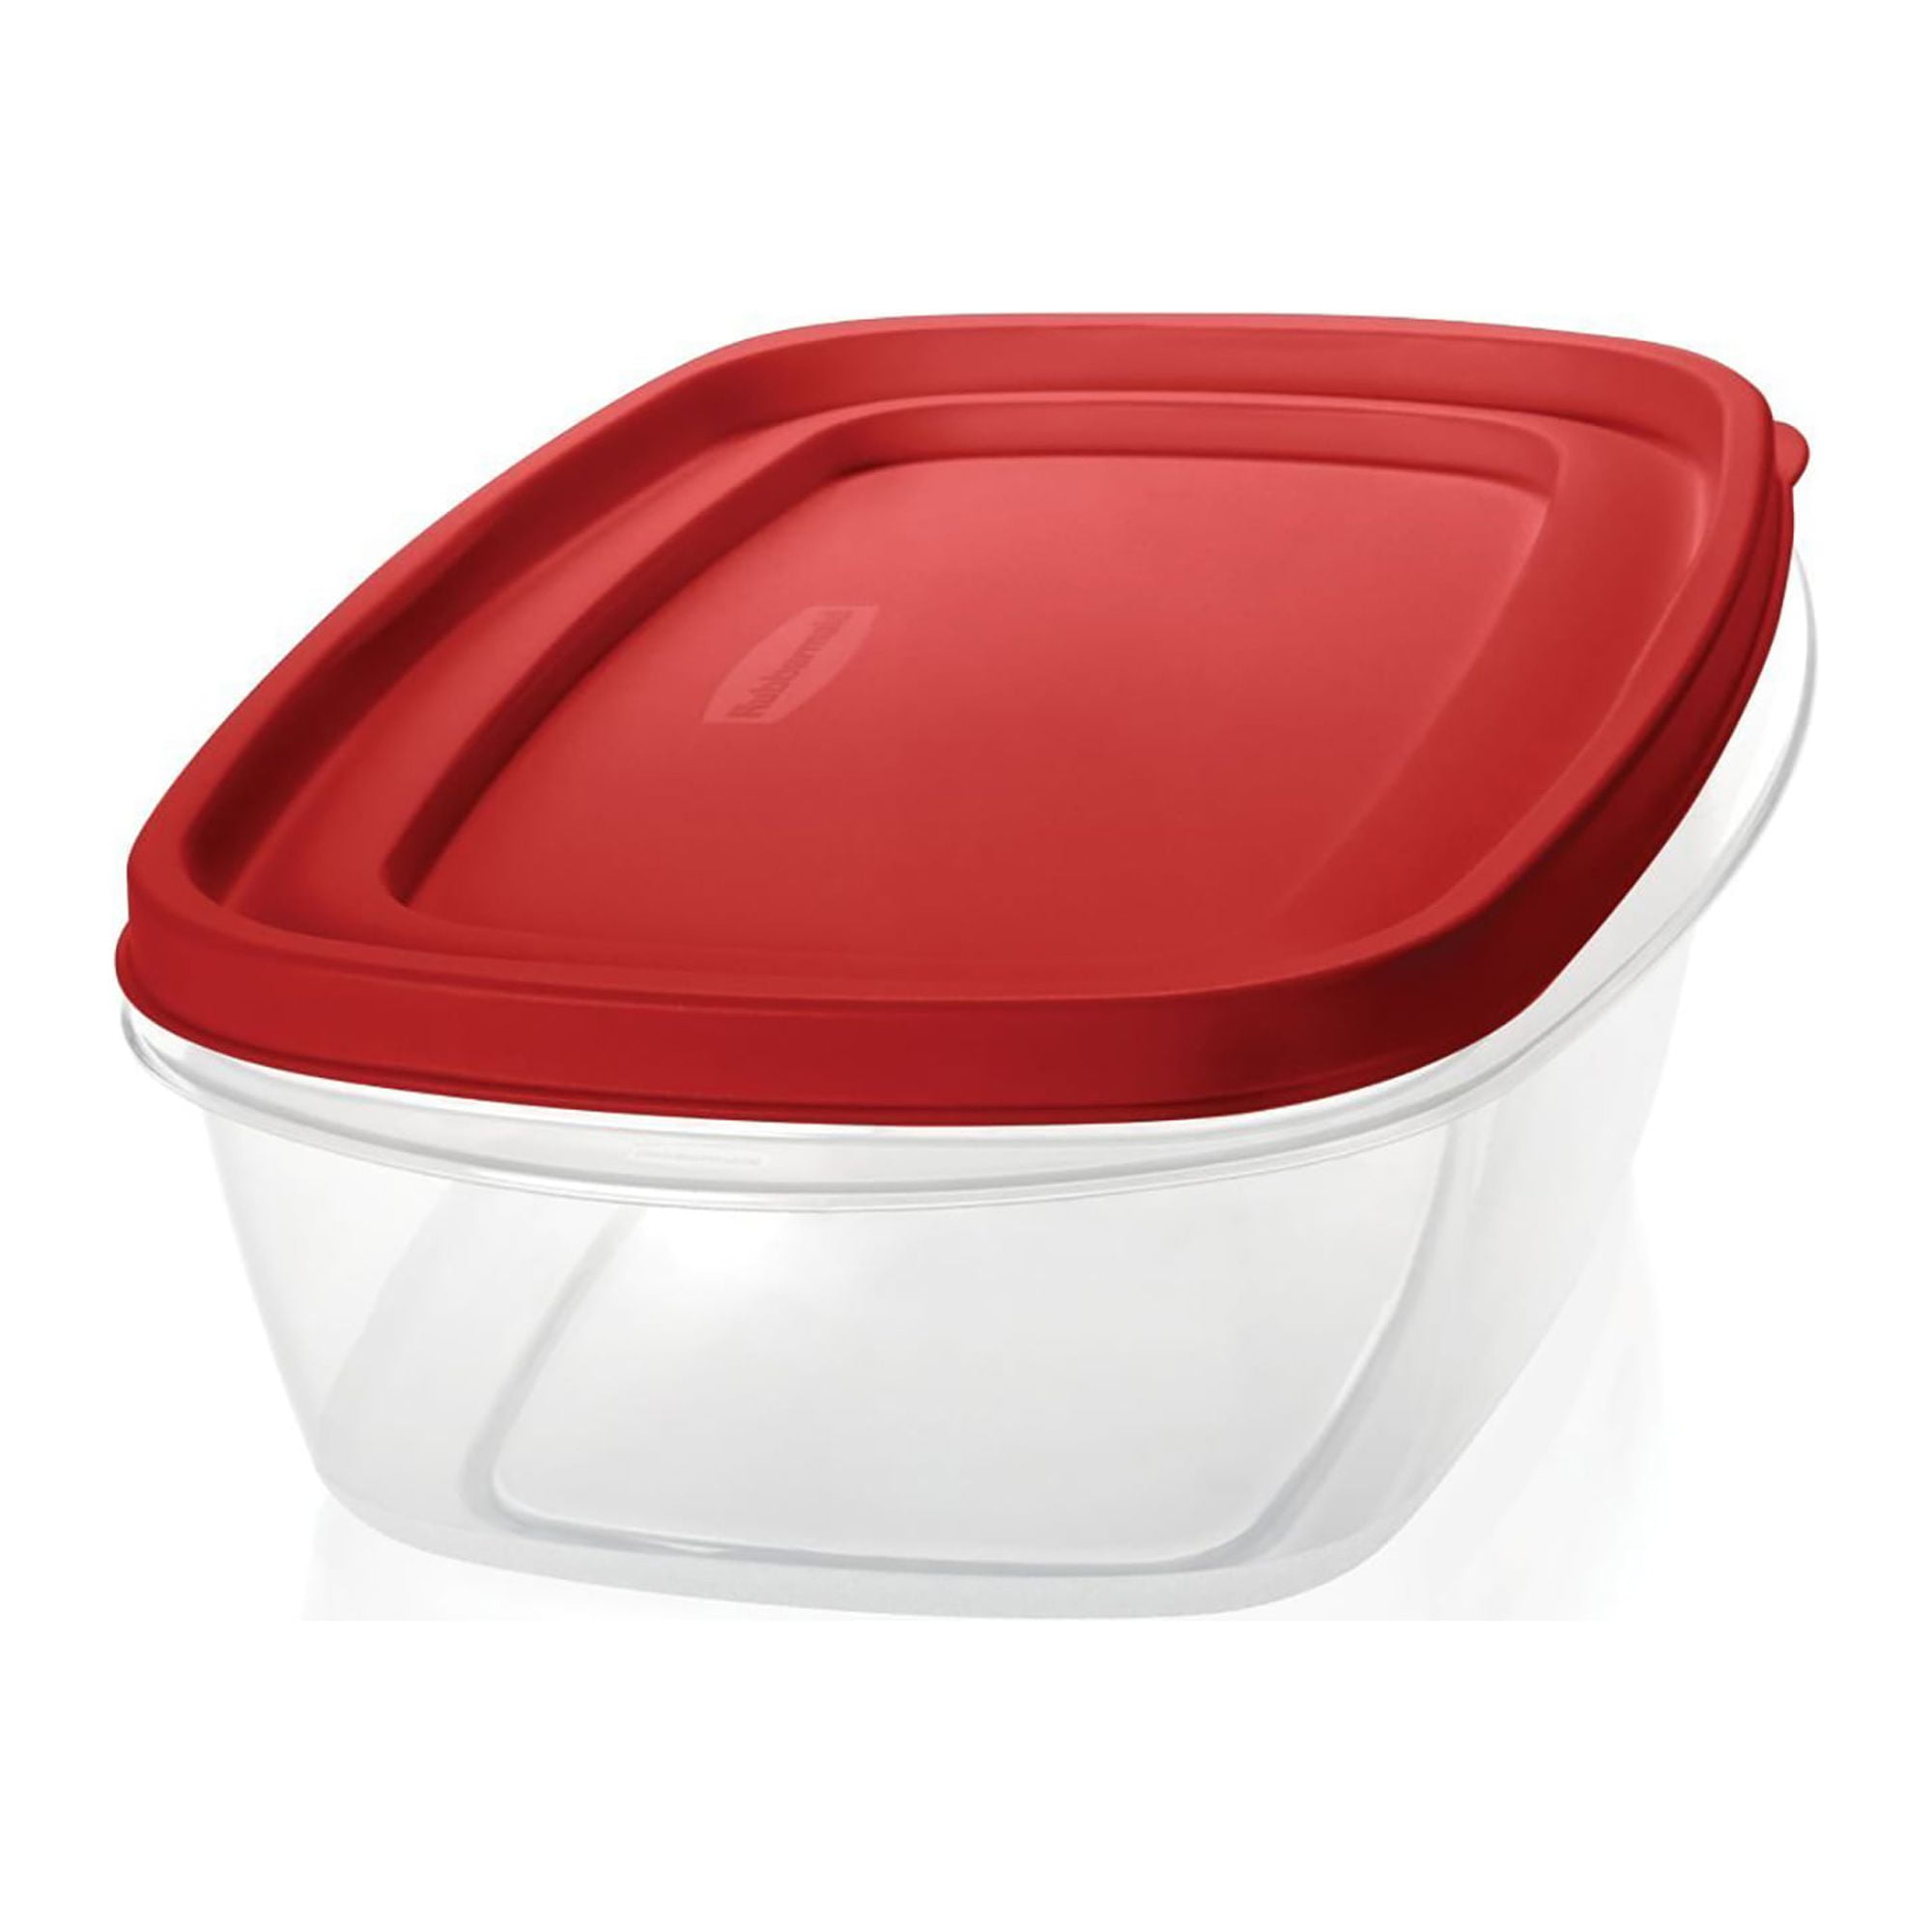 Rubbermaid Easy-Find Lids Food Storage Container Set - Red/Clear, 24 pc -  Kroger